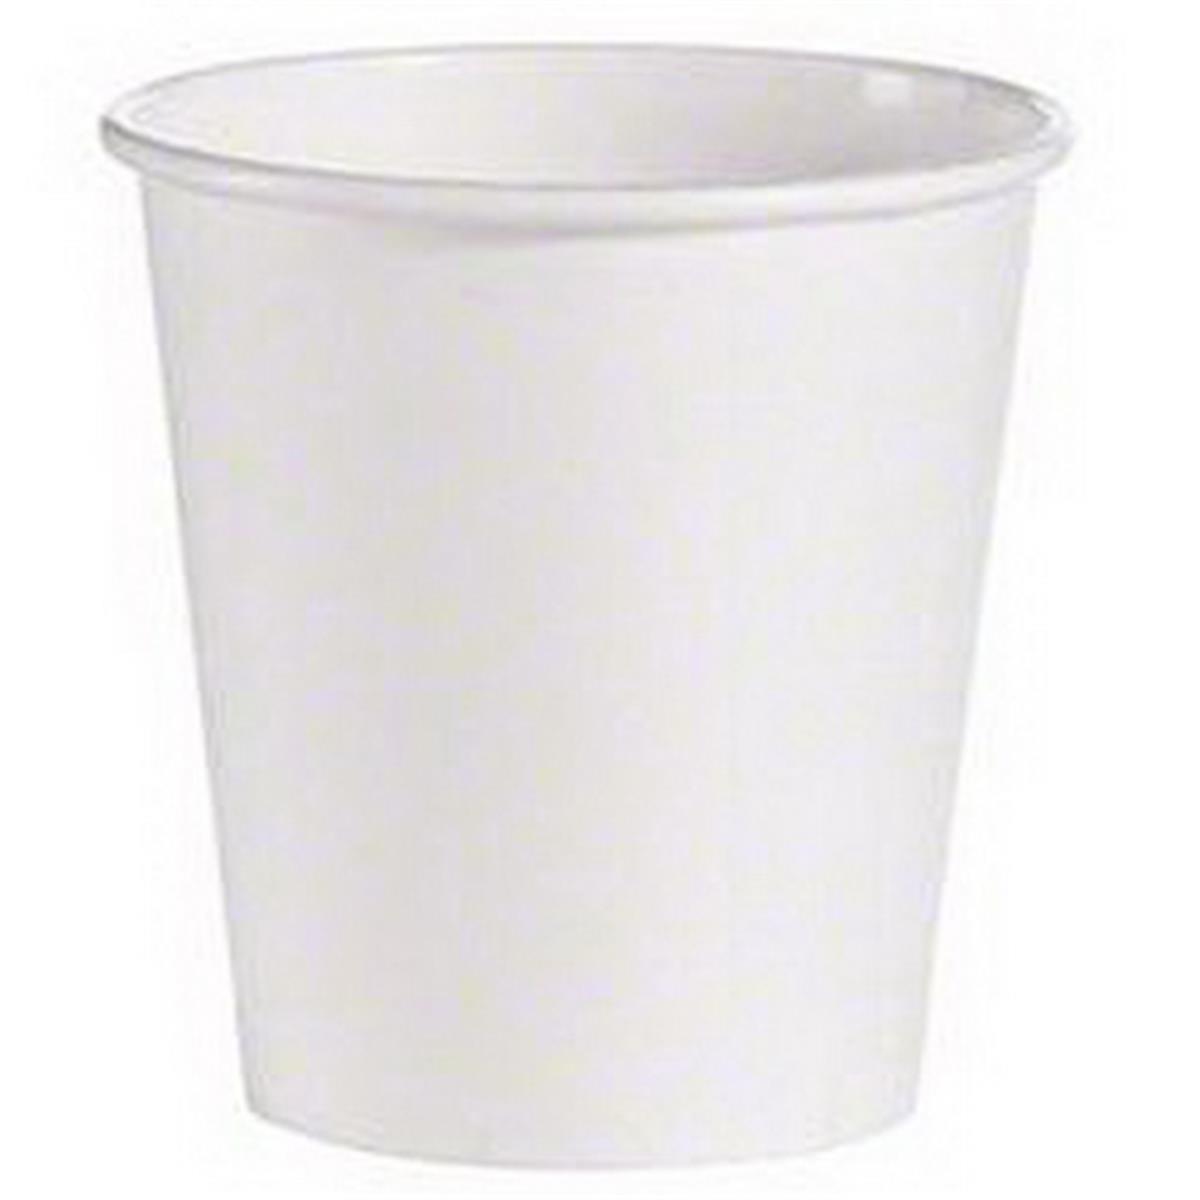 Solo Cup 510w-2050 Pec 10 Oz White Squat Hot Cup - Pack Of 1000